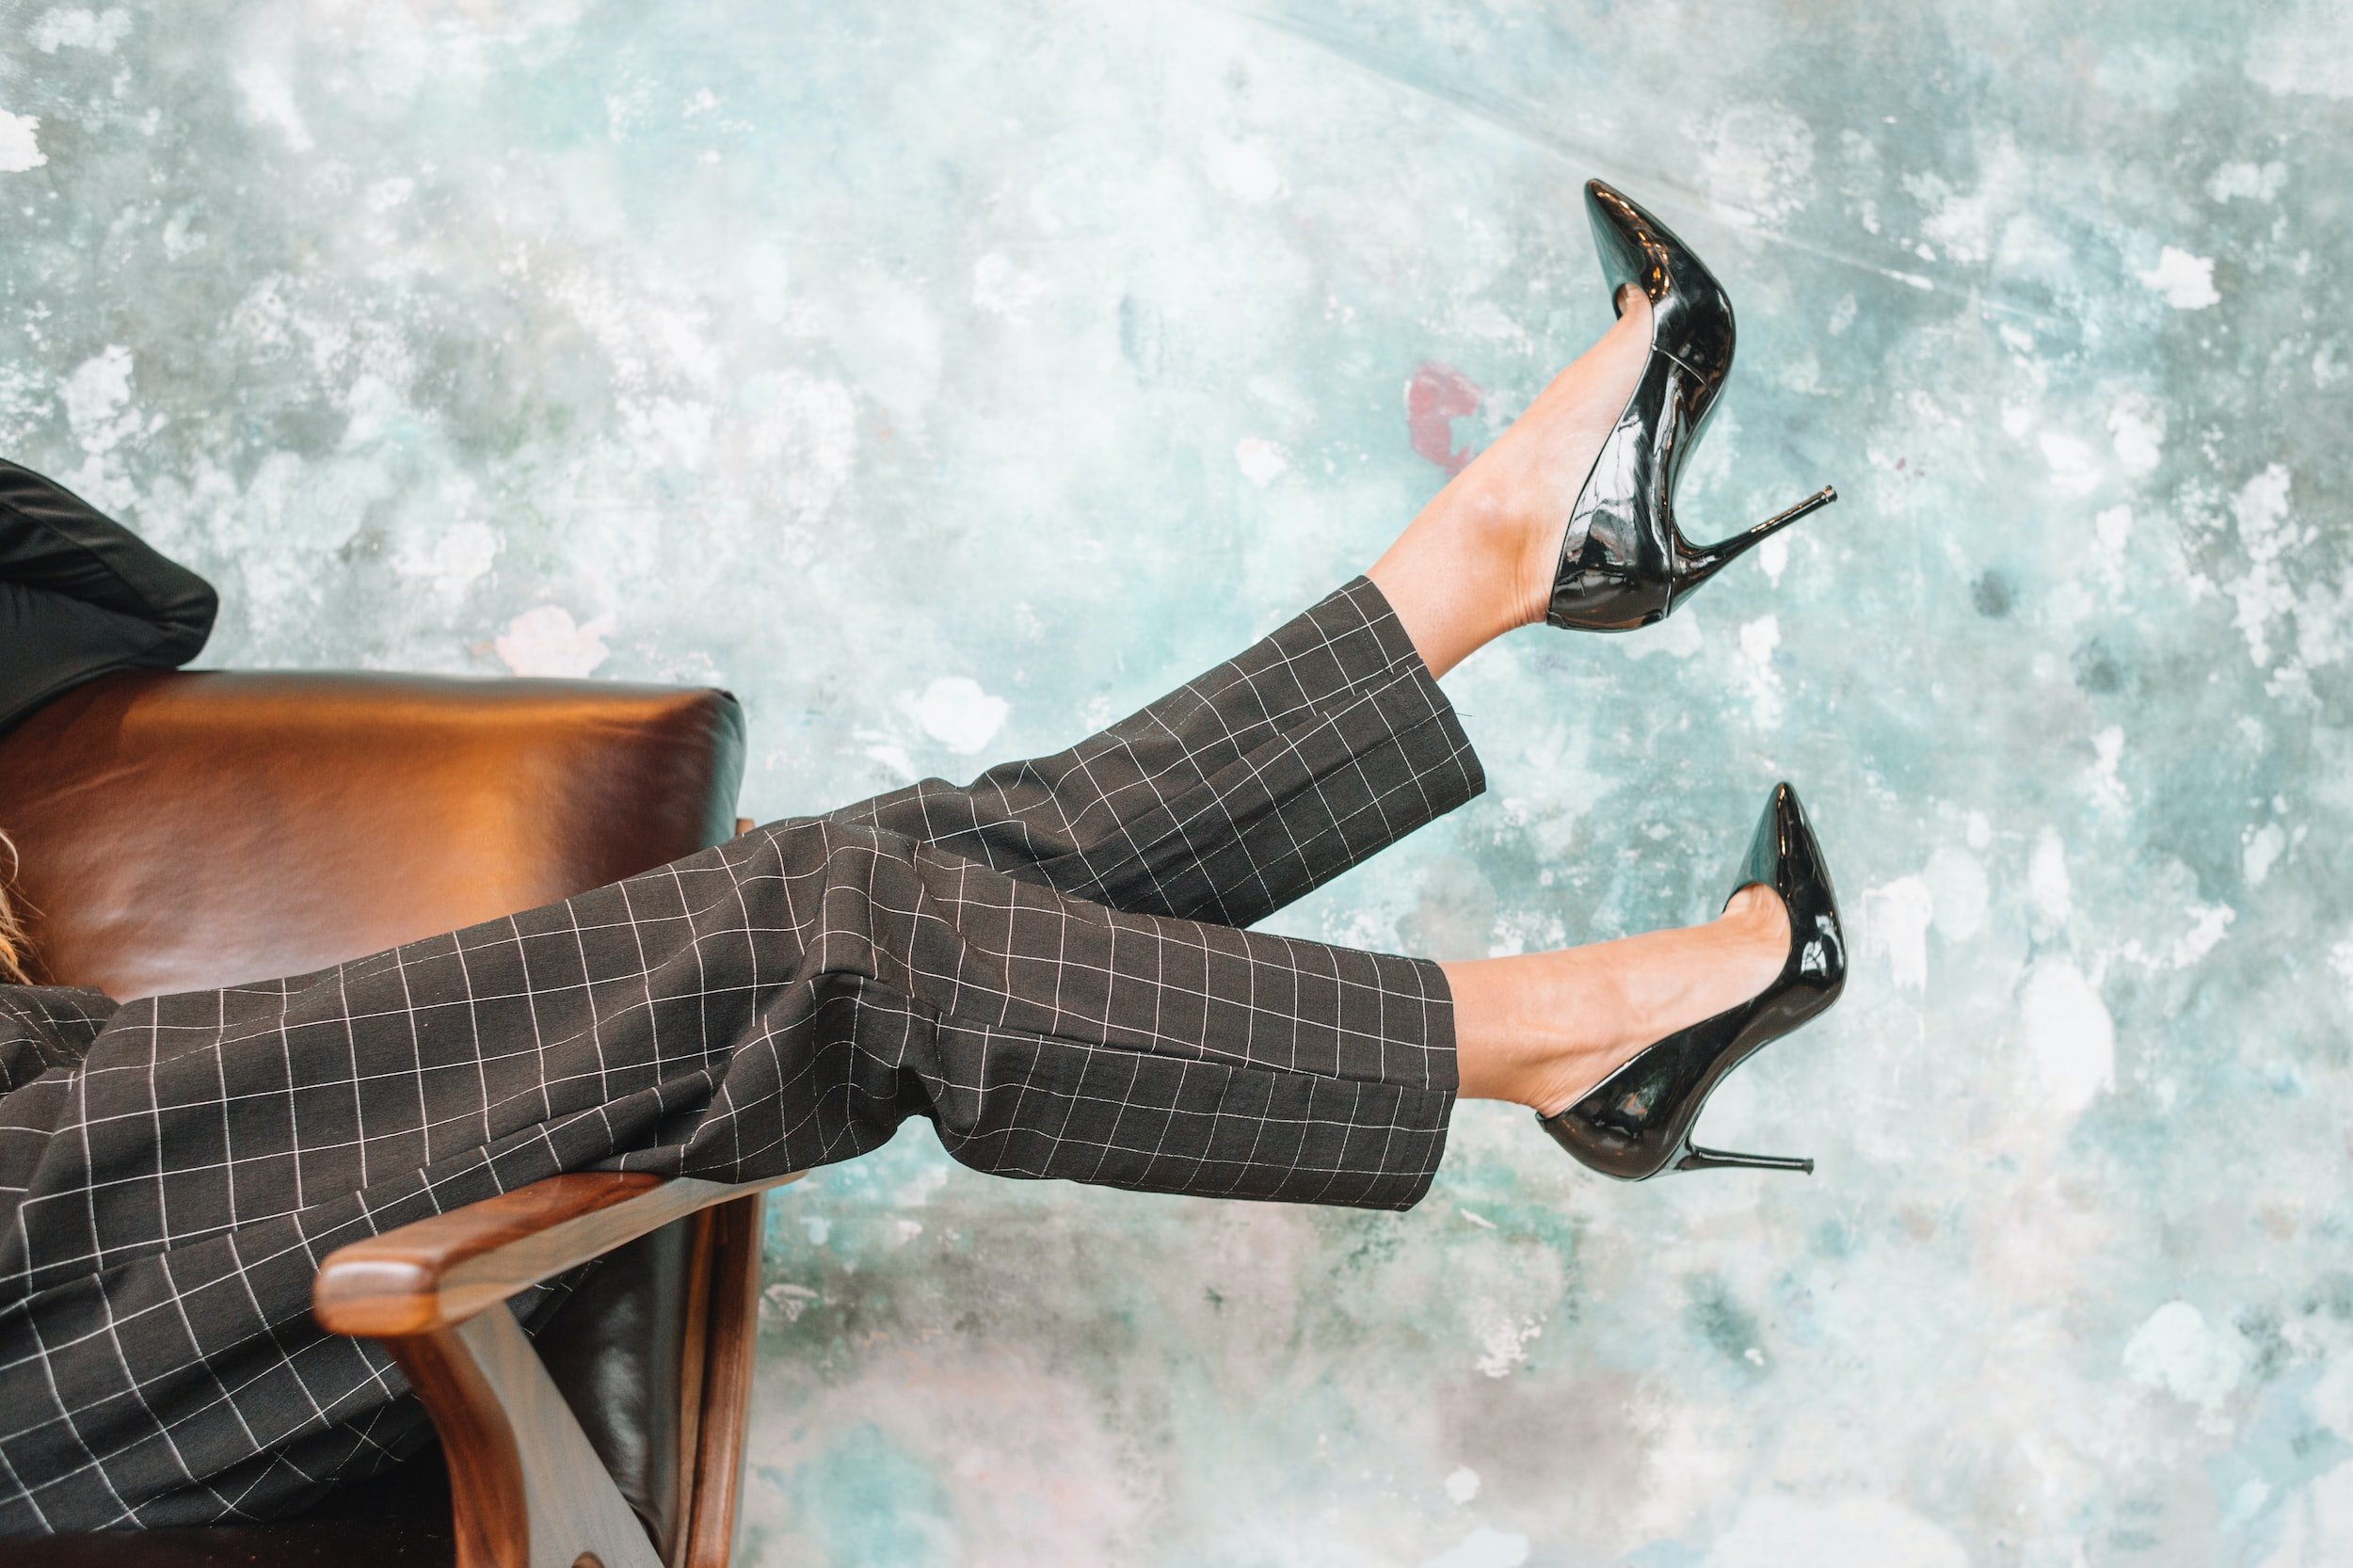 Does Wearing High Heels Contribute to Varicose Veins?